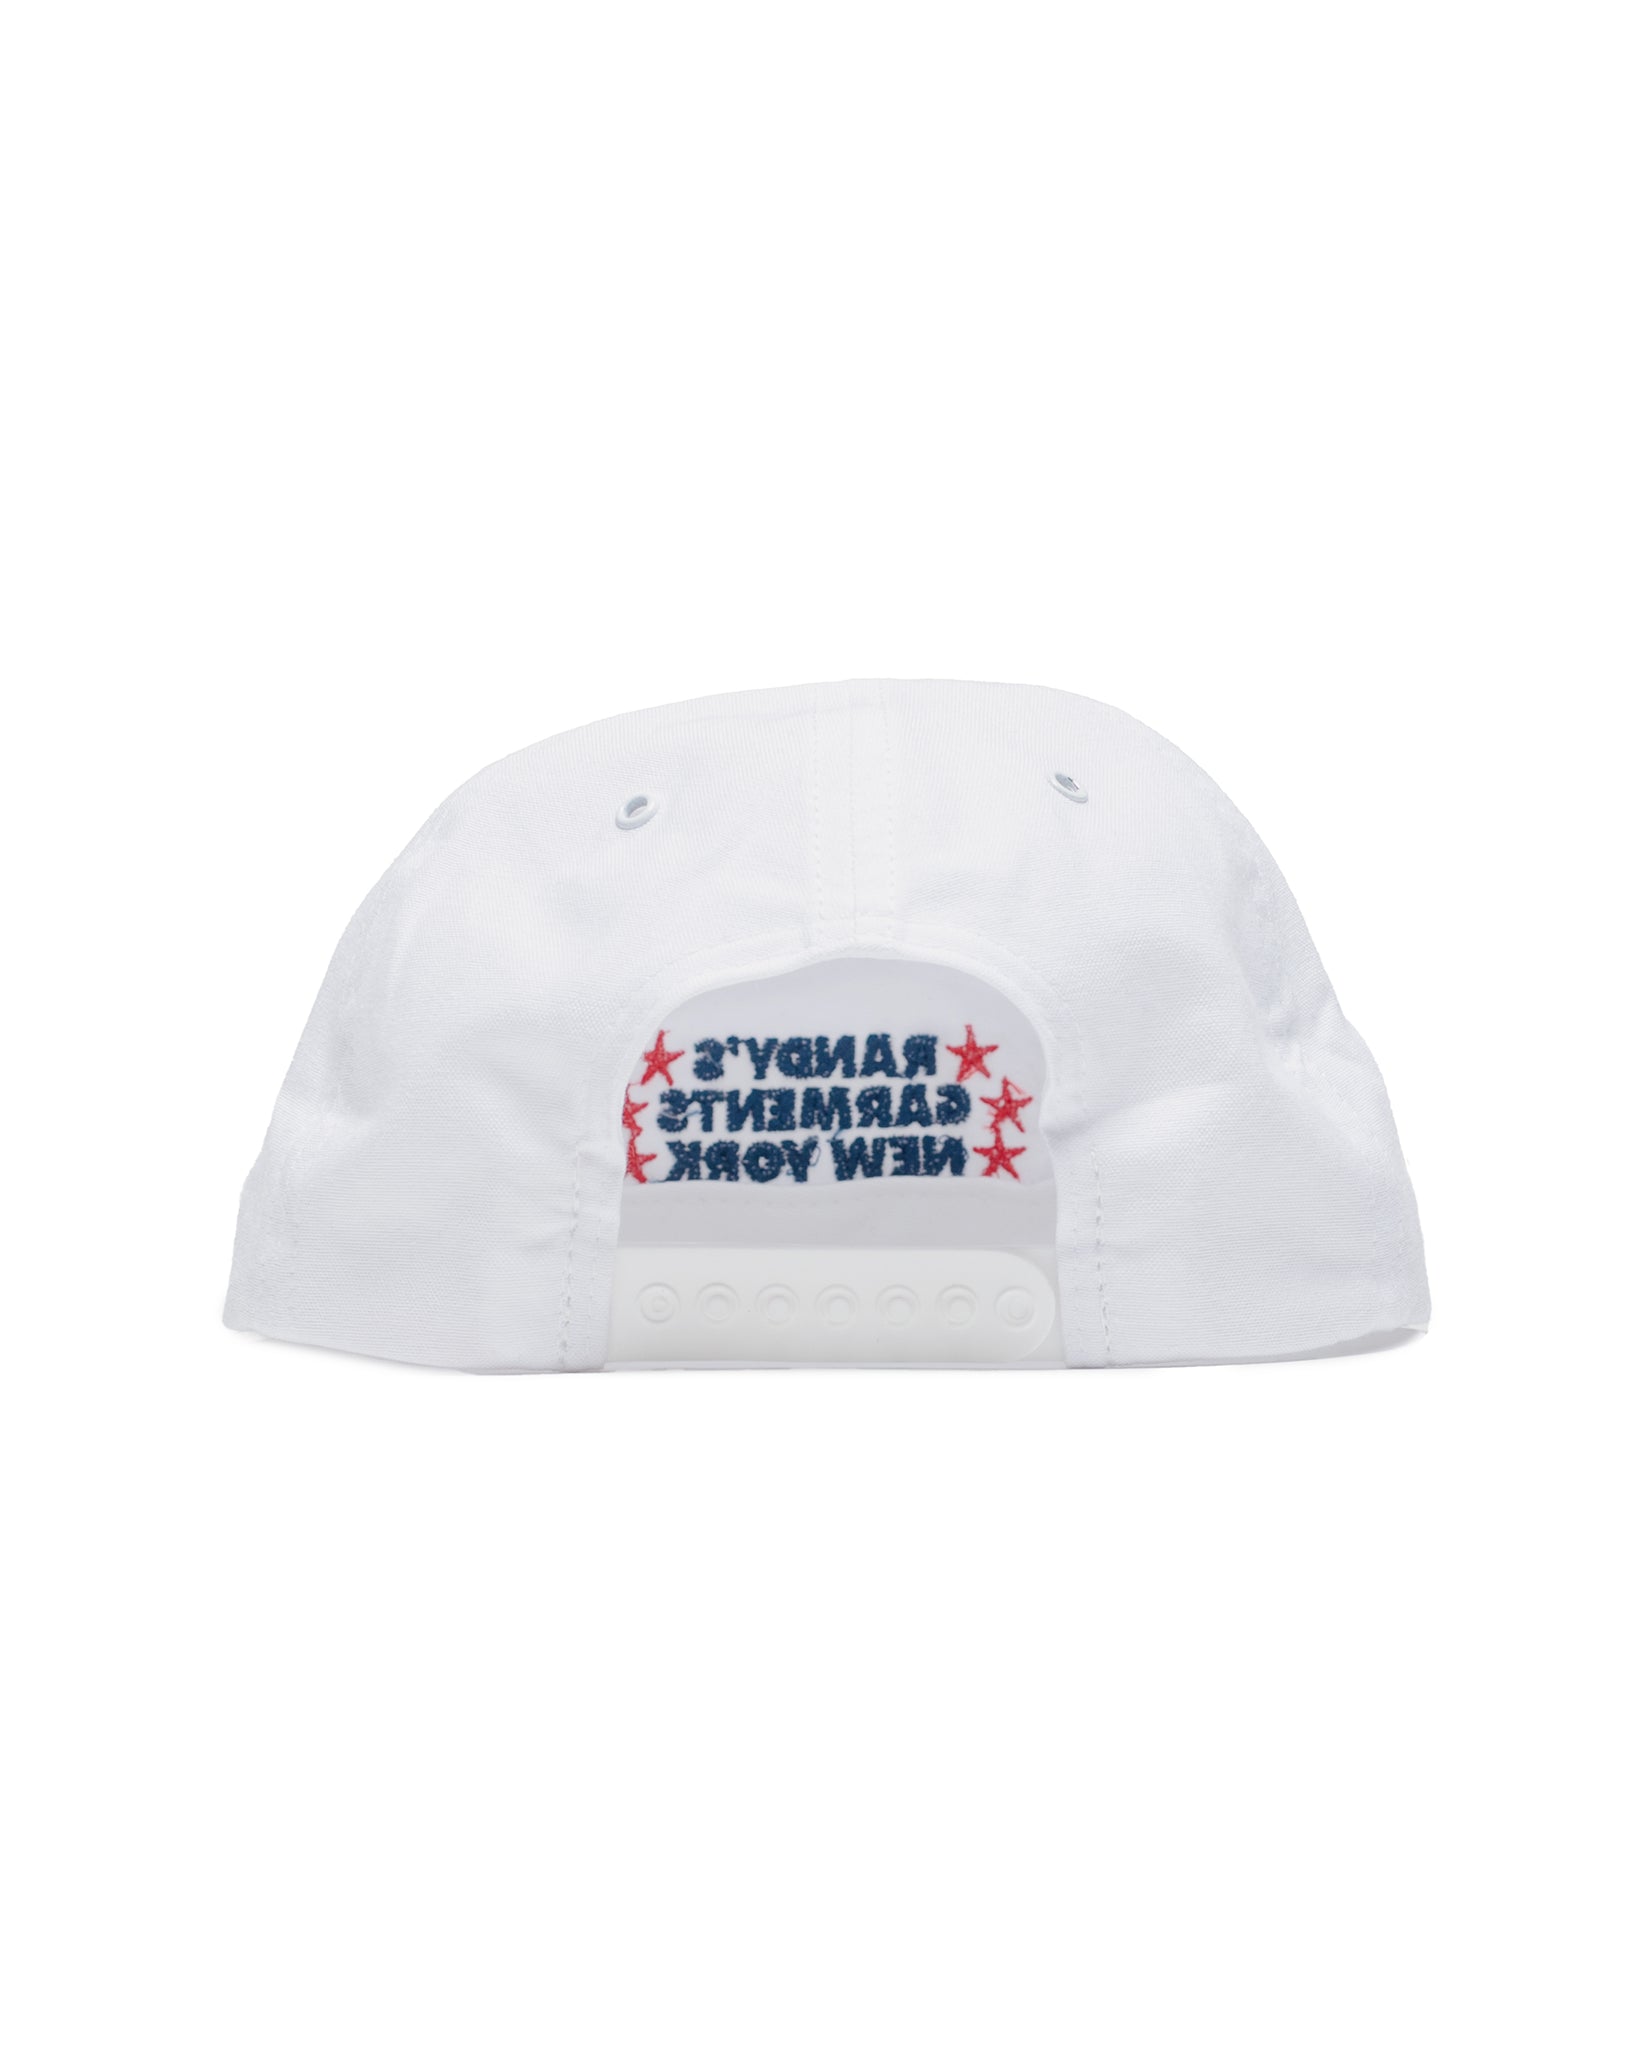 Randy's Garments 5-Panel Snapback 6040 Solid Oxford Cloth White back